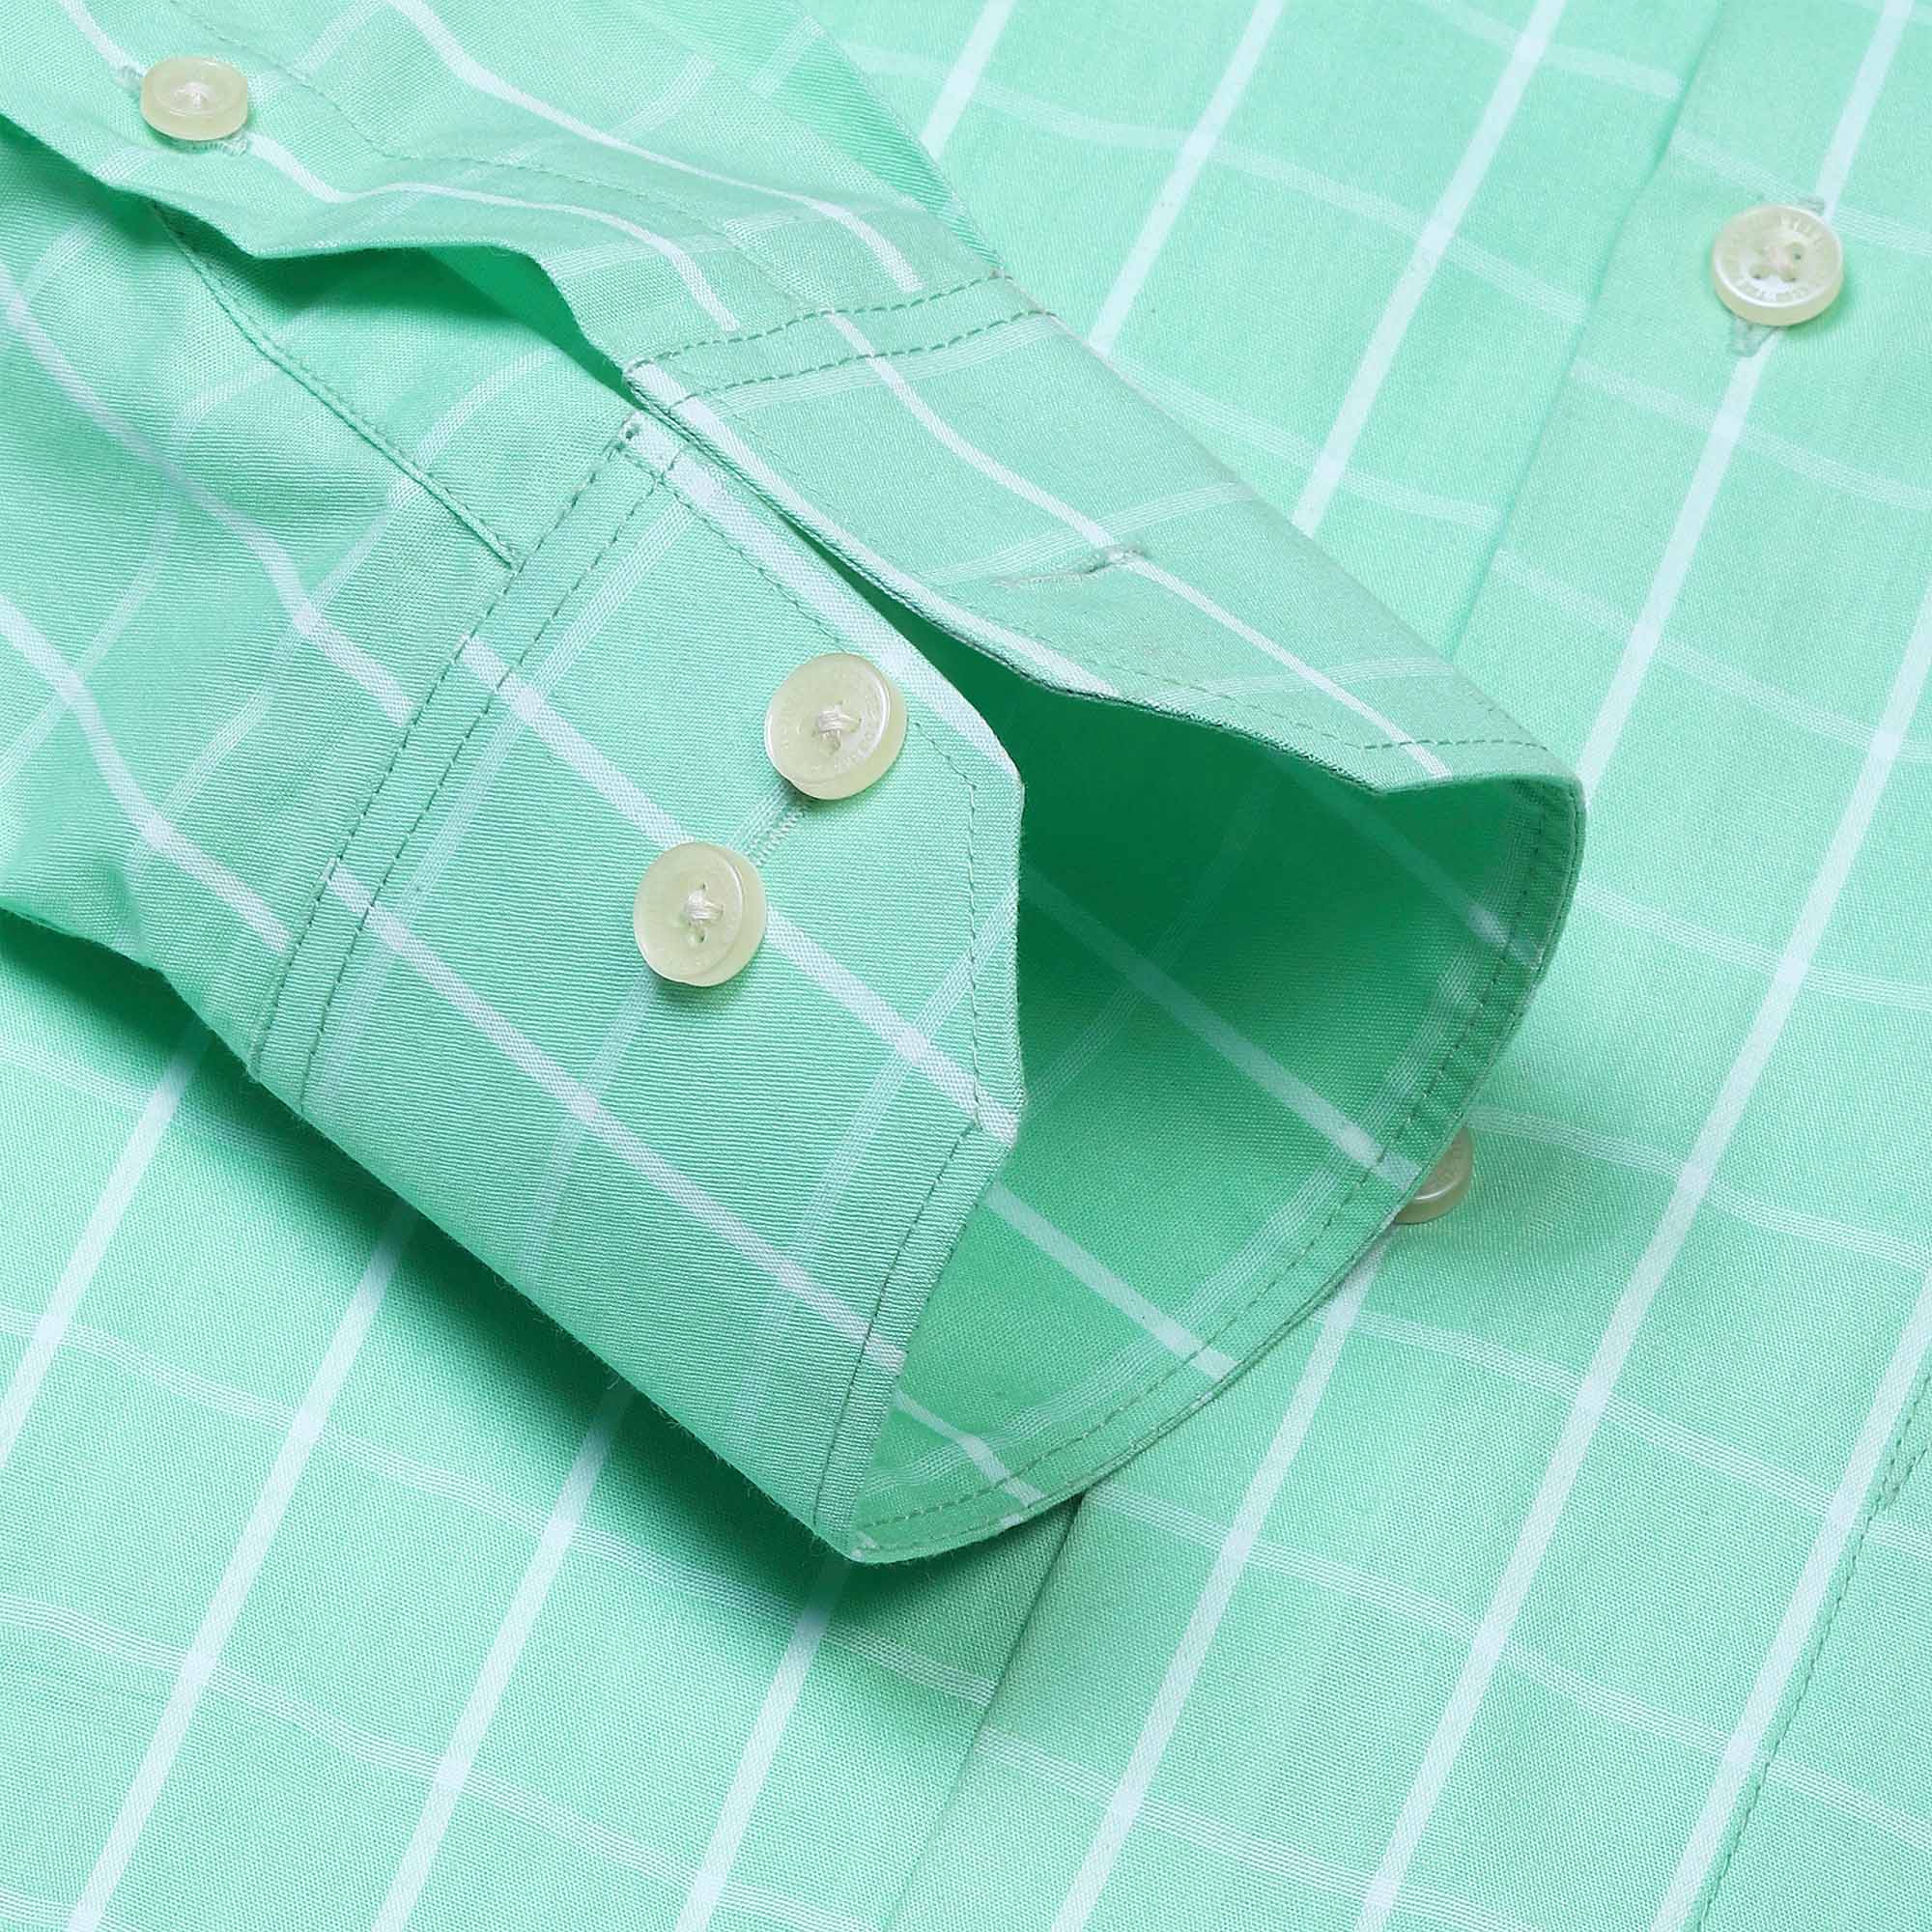 Metro Yarn Died Check Shirt In Pistachio - The Formal Club